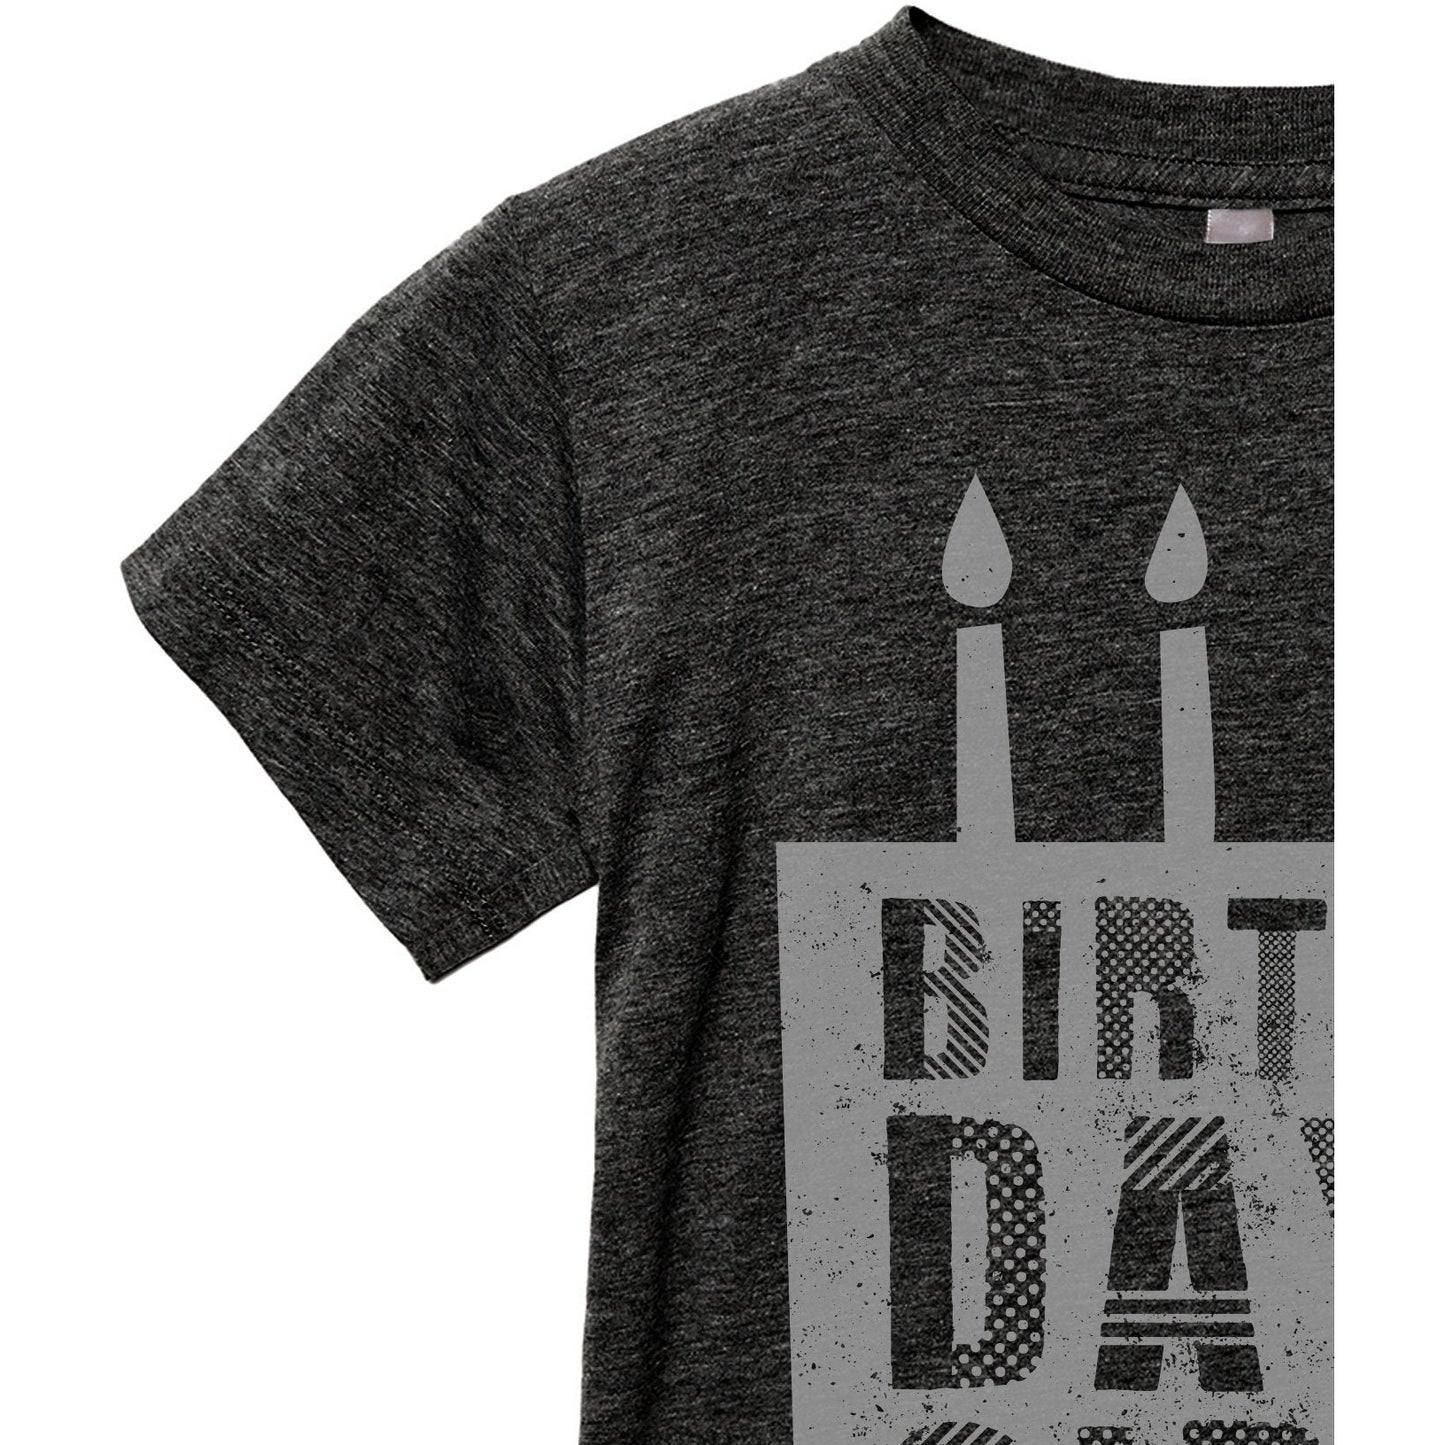 Birthday Girl Toddler's Go-To Crewneck Tee Heather Grey Zoom Details A